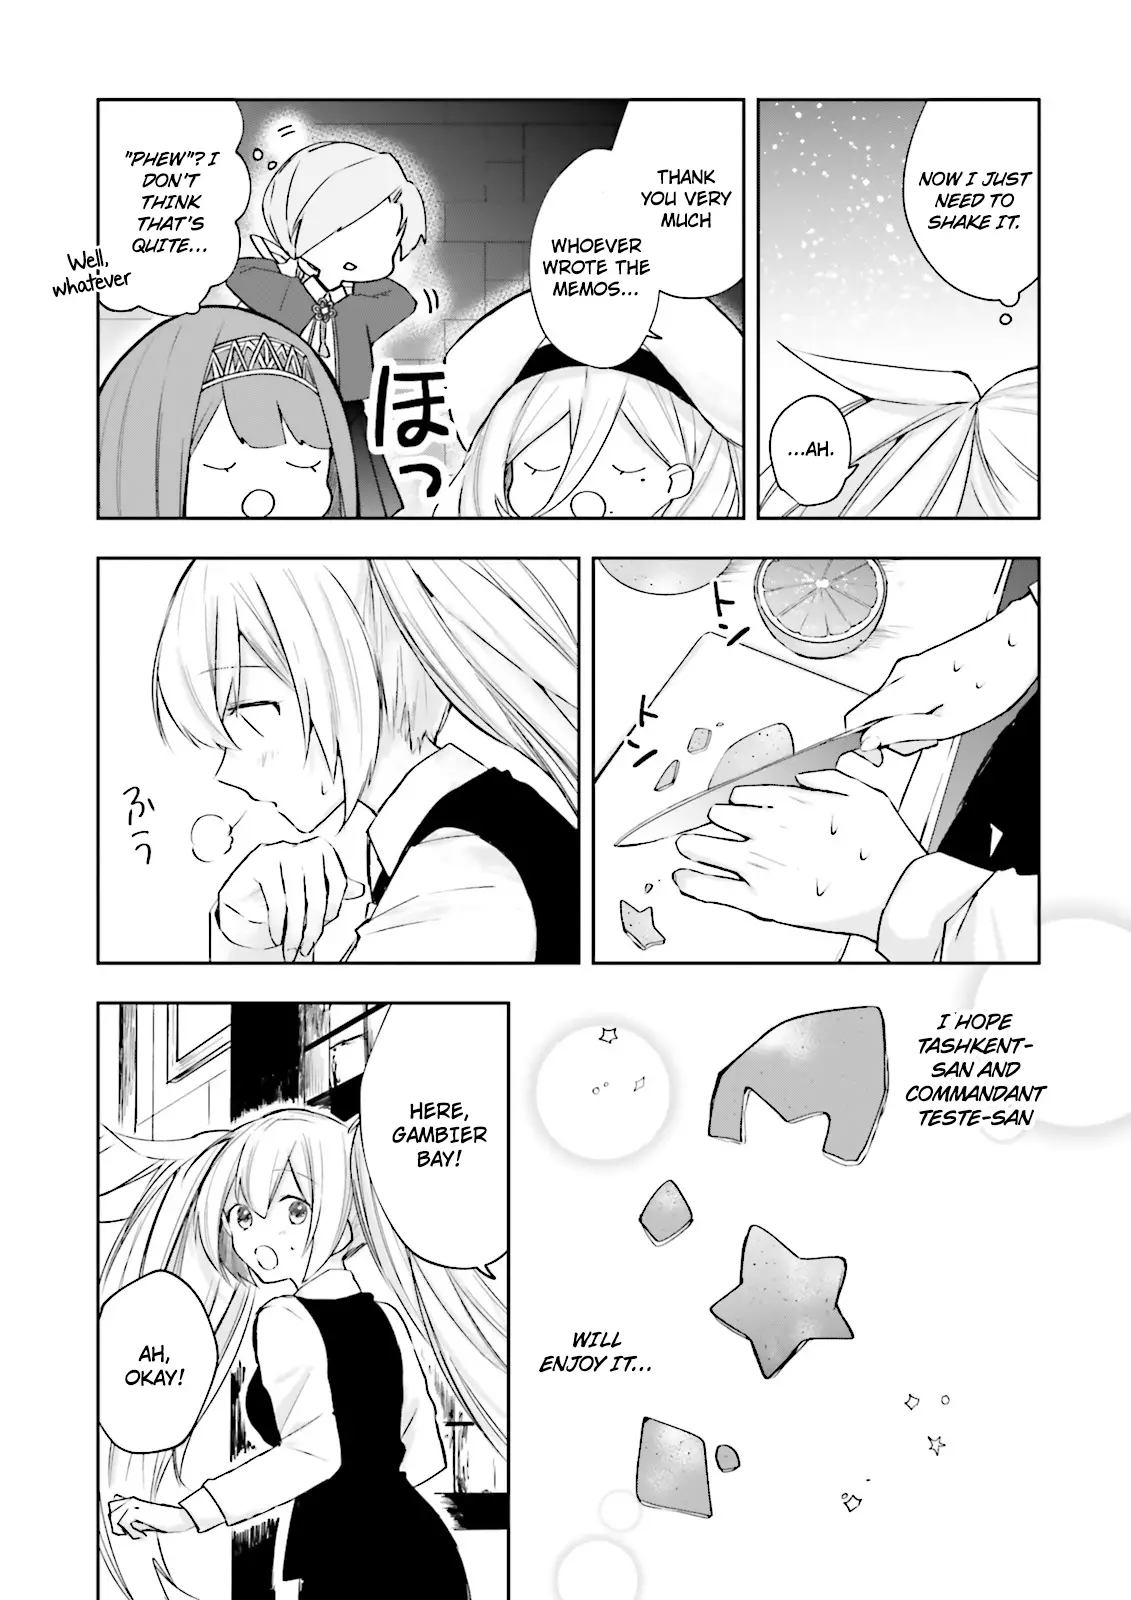 Kantai Collection -Kancolle- Tonight, Another "salute"! - 5 page 16